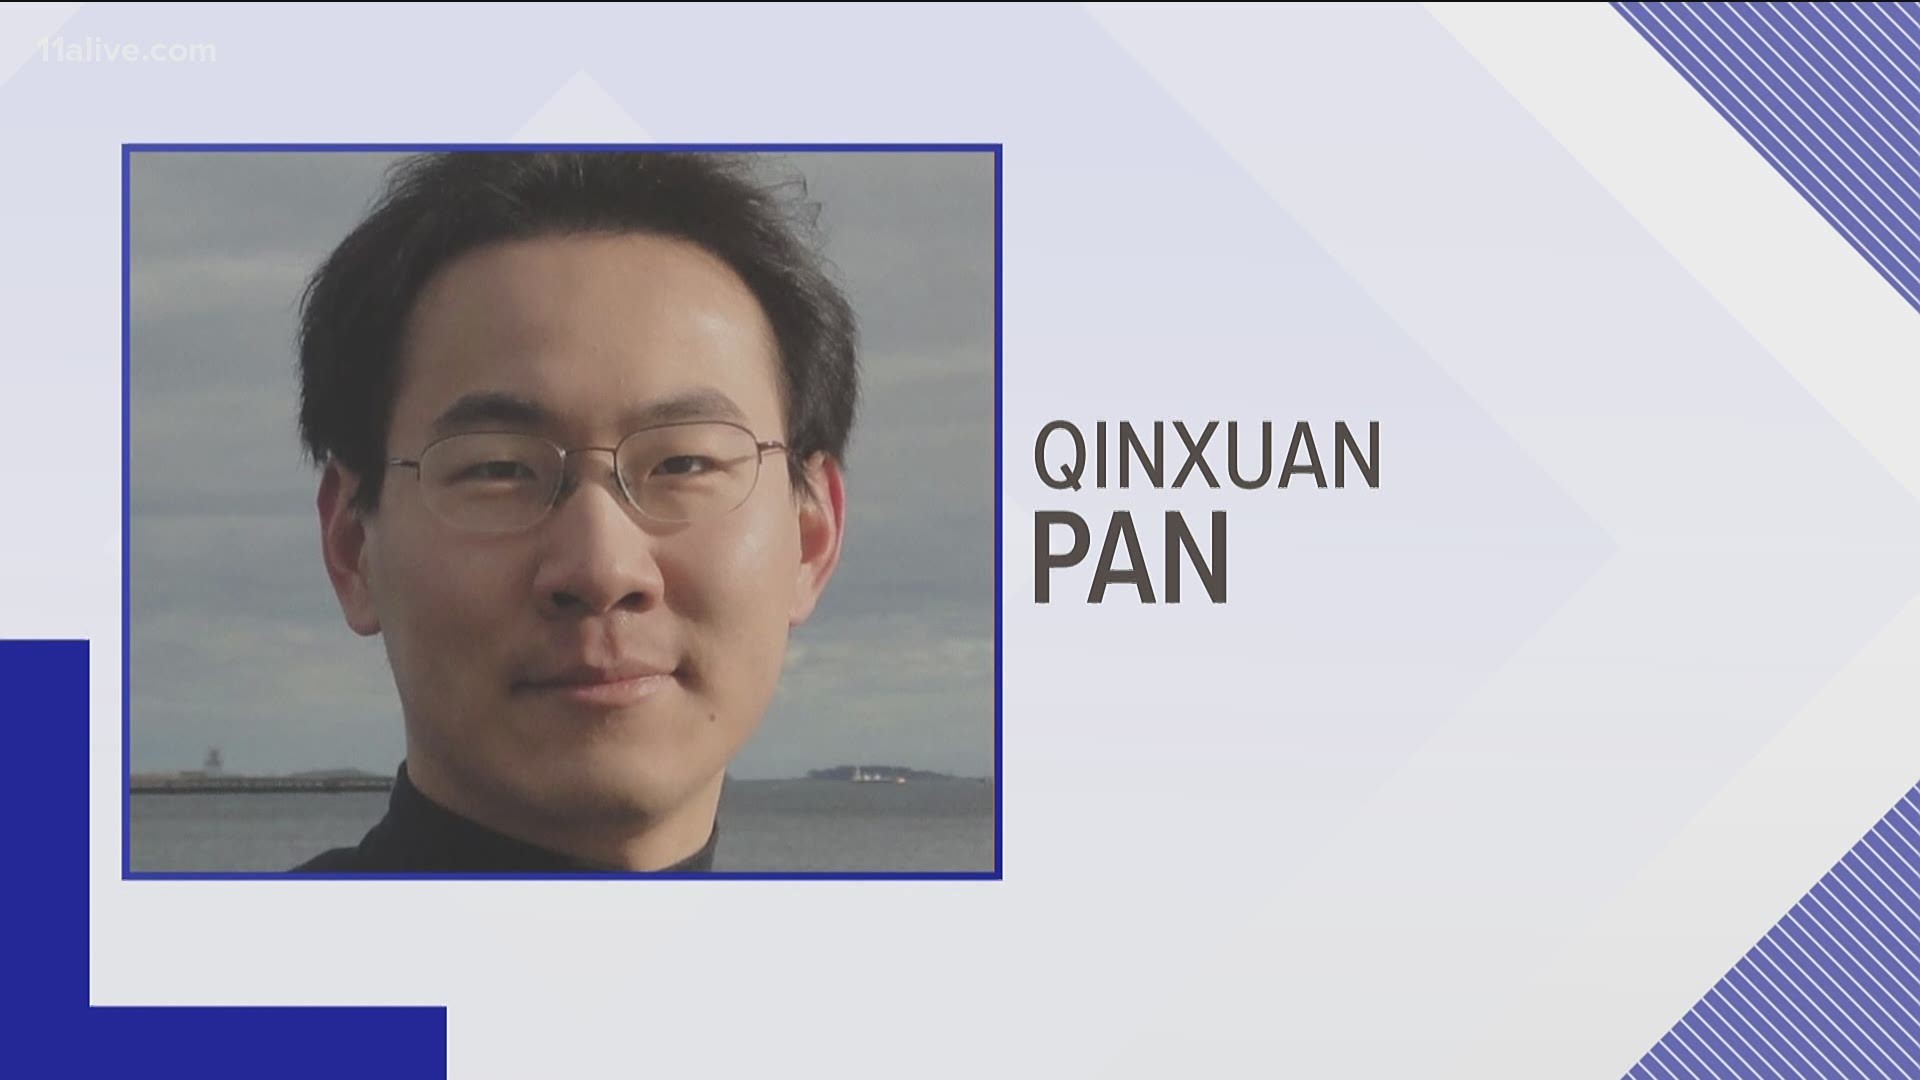 Qinxuan Pan is wanted in connection to the murder of a 29-year-old MIT grad student. Pan was last believed to be seen in the Brookhaven or Duluth areas.